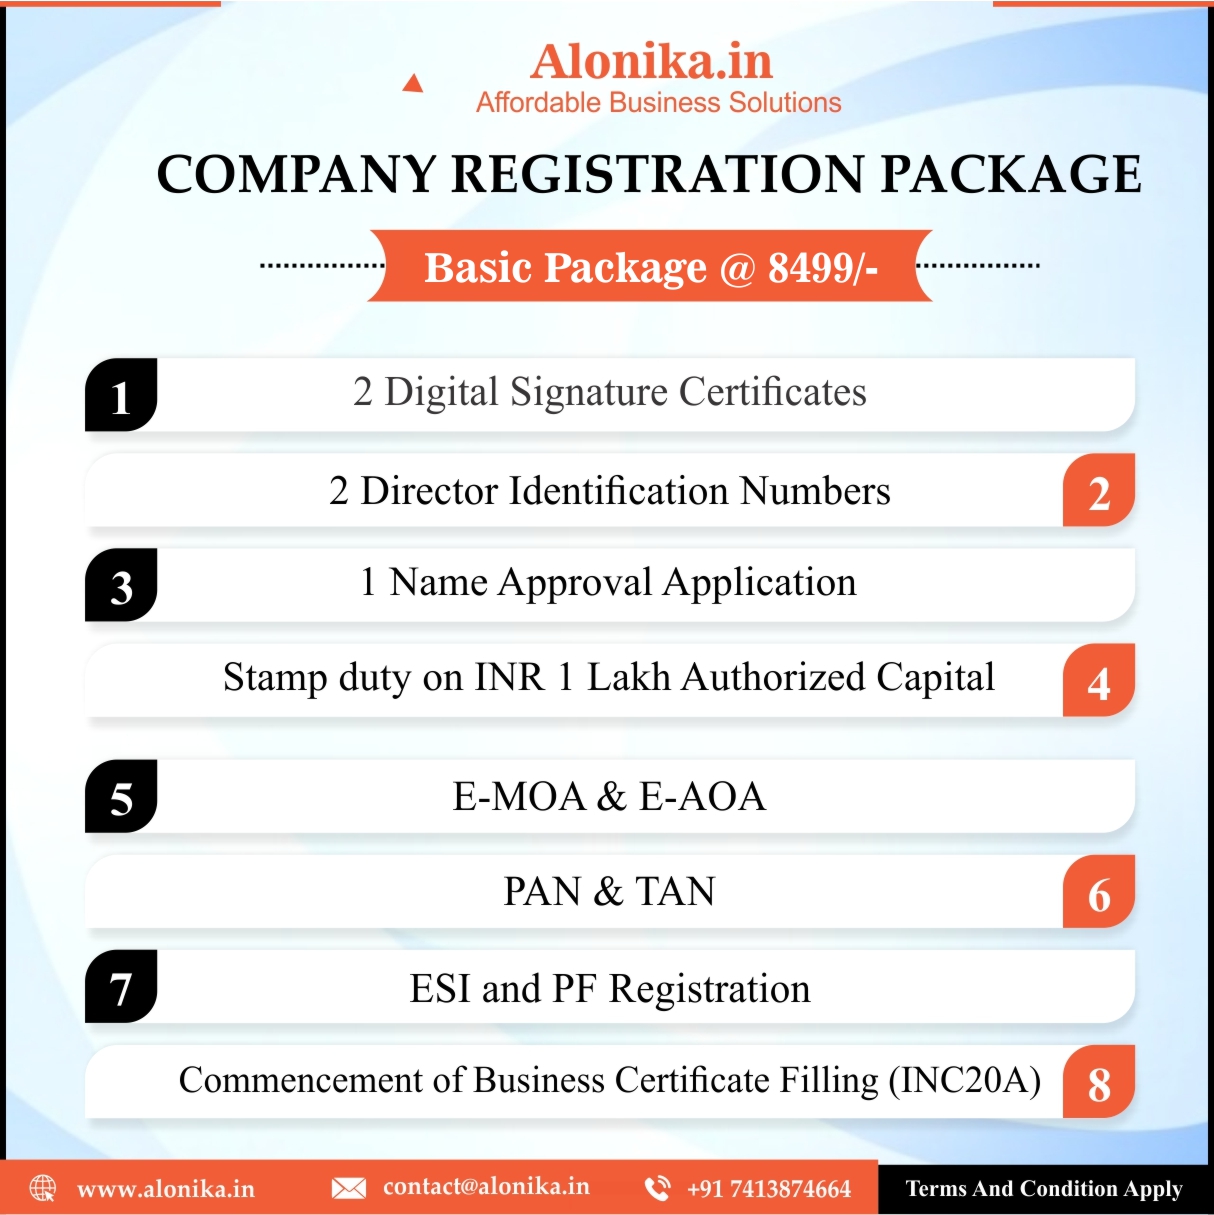 What are the essential documents required for company registration in Hyderabad?